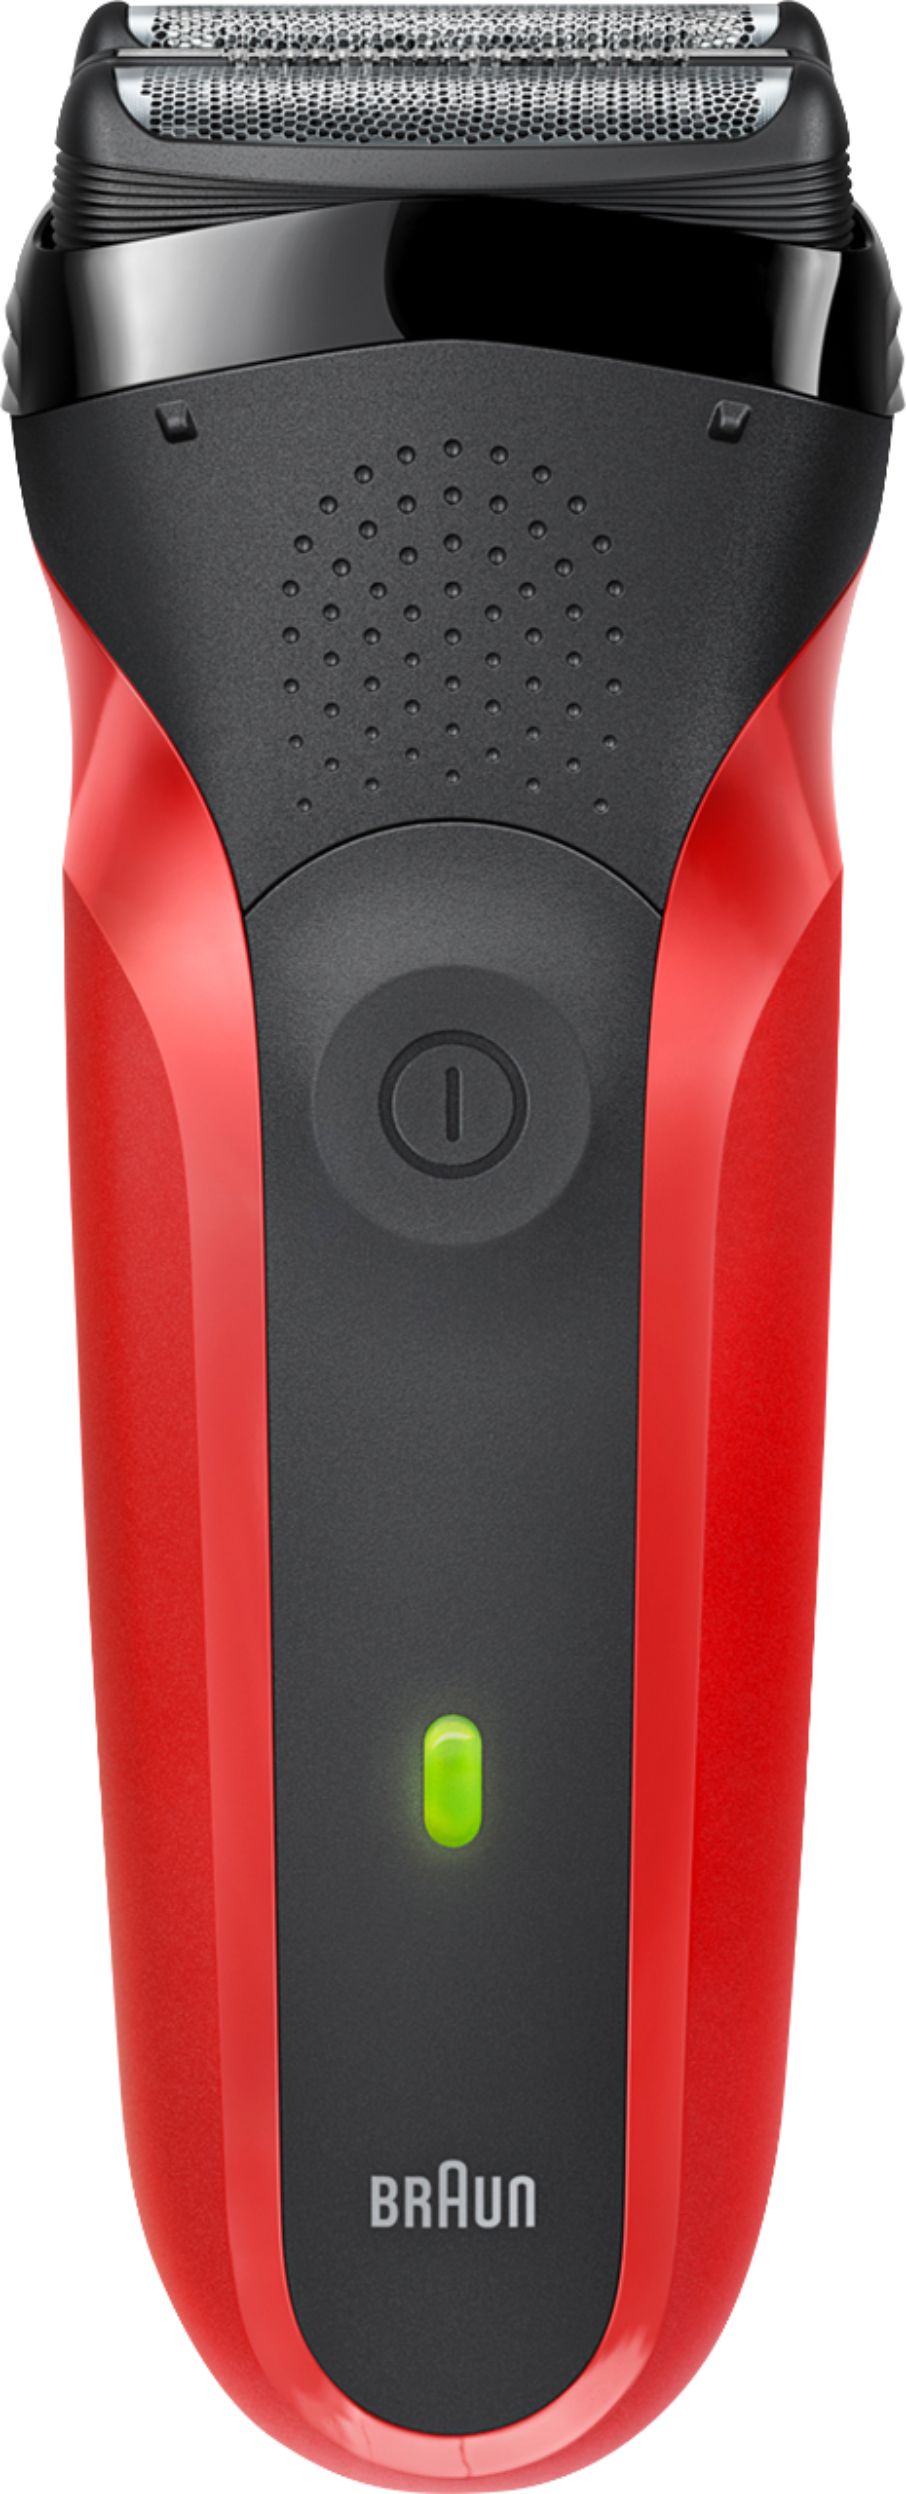 Angle View: Braun - Series 3 Electric Shaver - Red